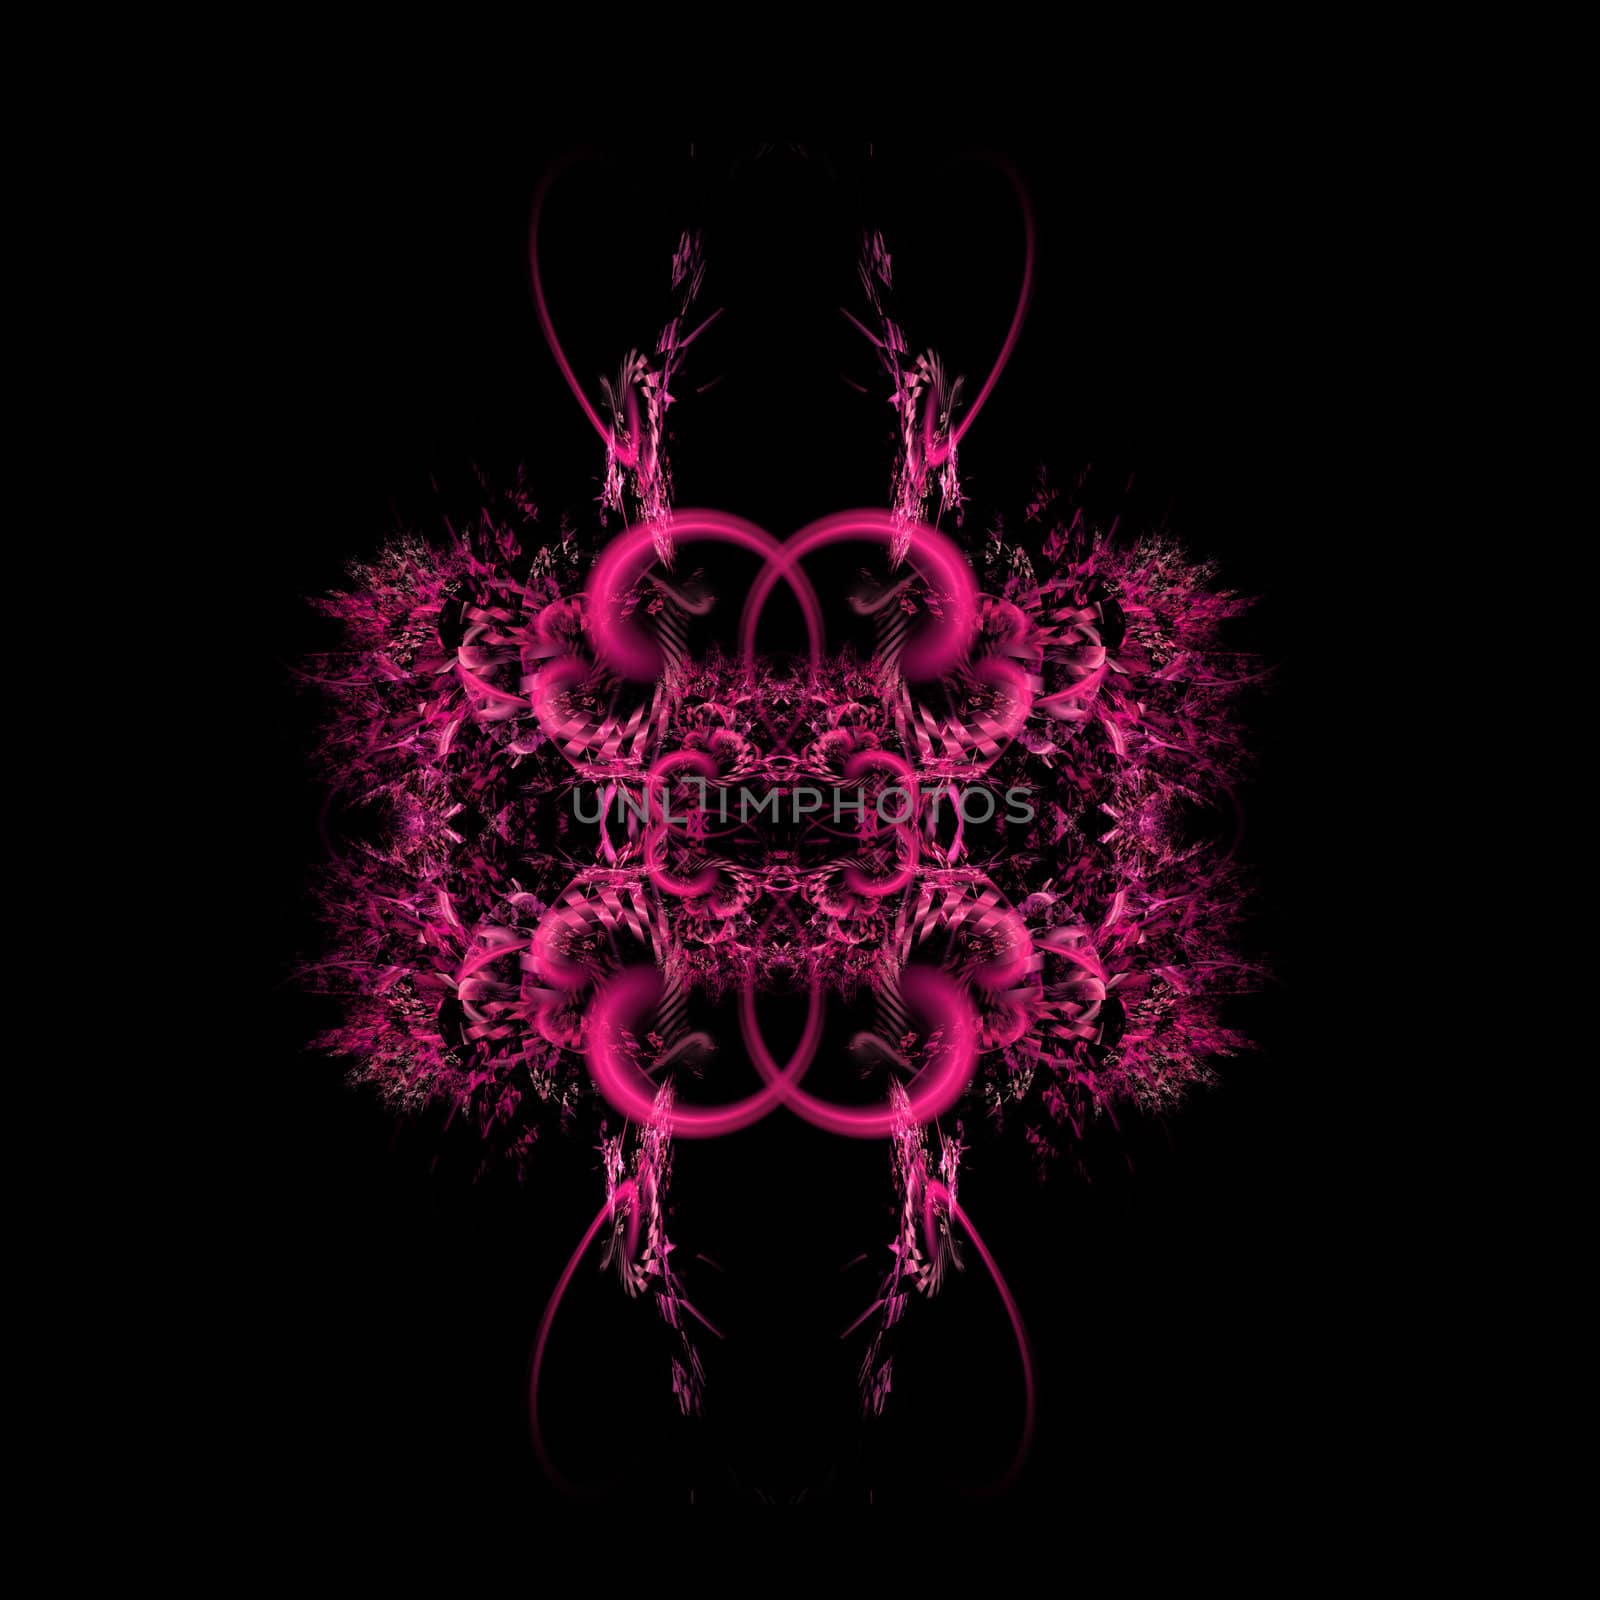 Symmetrical abstract fractal background isolated on black